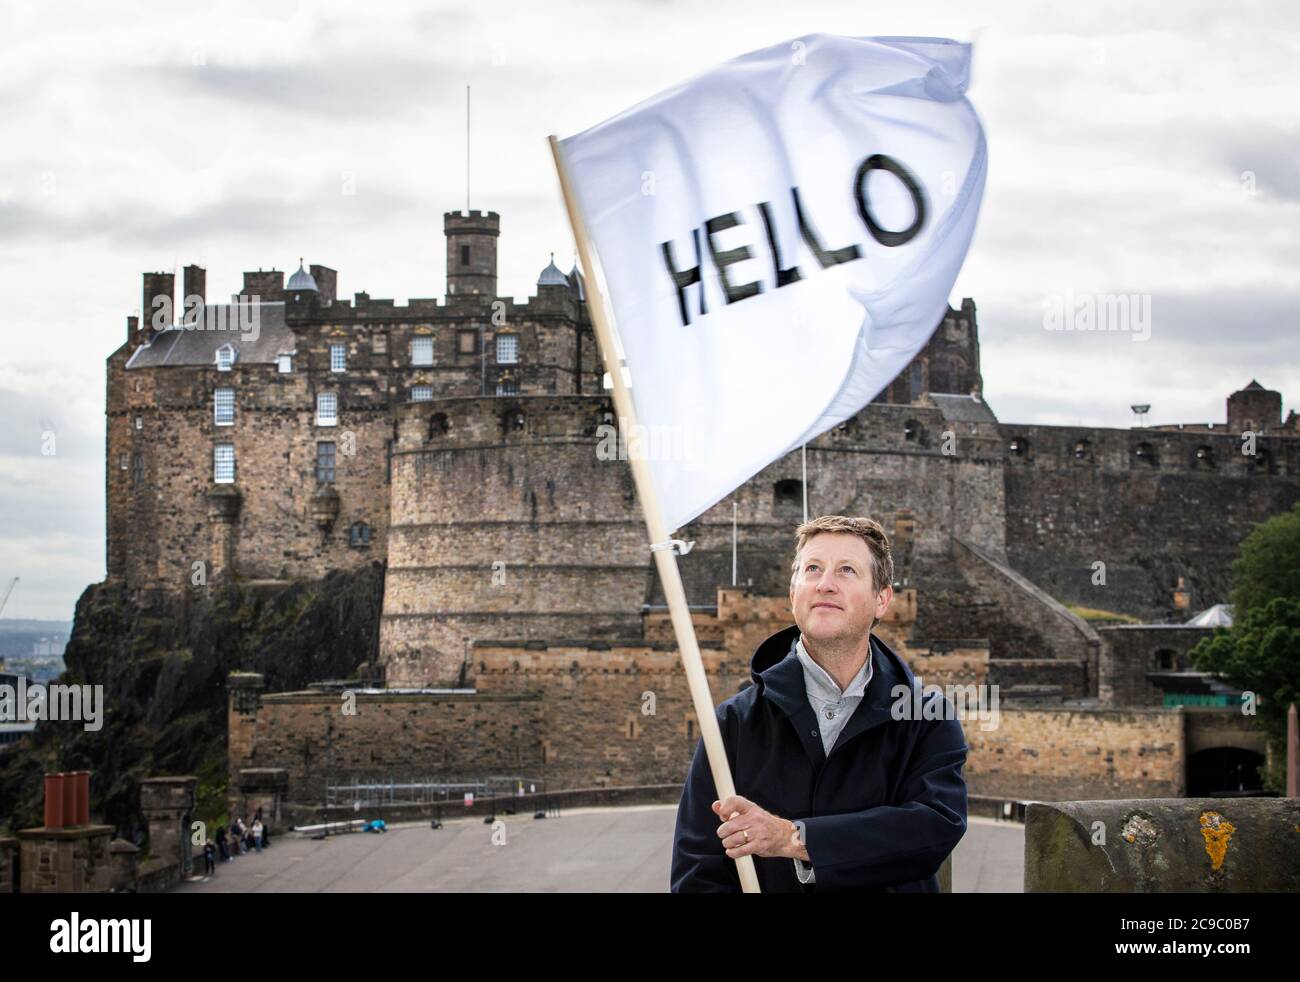 Artist Peter Liversidge flies one of his HELLO flags above the rooftops of Edinburgh as he revisits his 2013 Edinburgh Art Festival commission Flags for Edinburgh which invited buildings across the city to fly a white flag that reads HELLO. Stock Photo